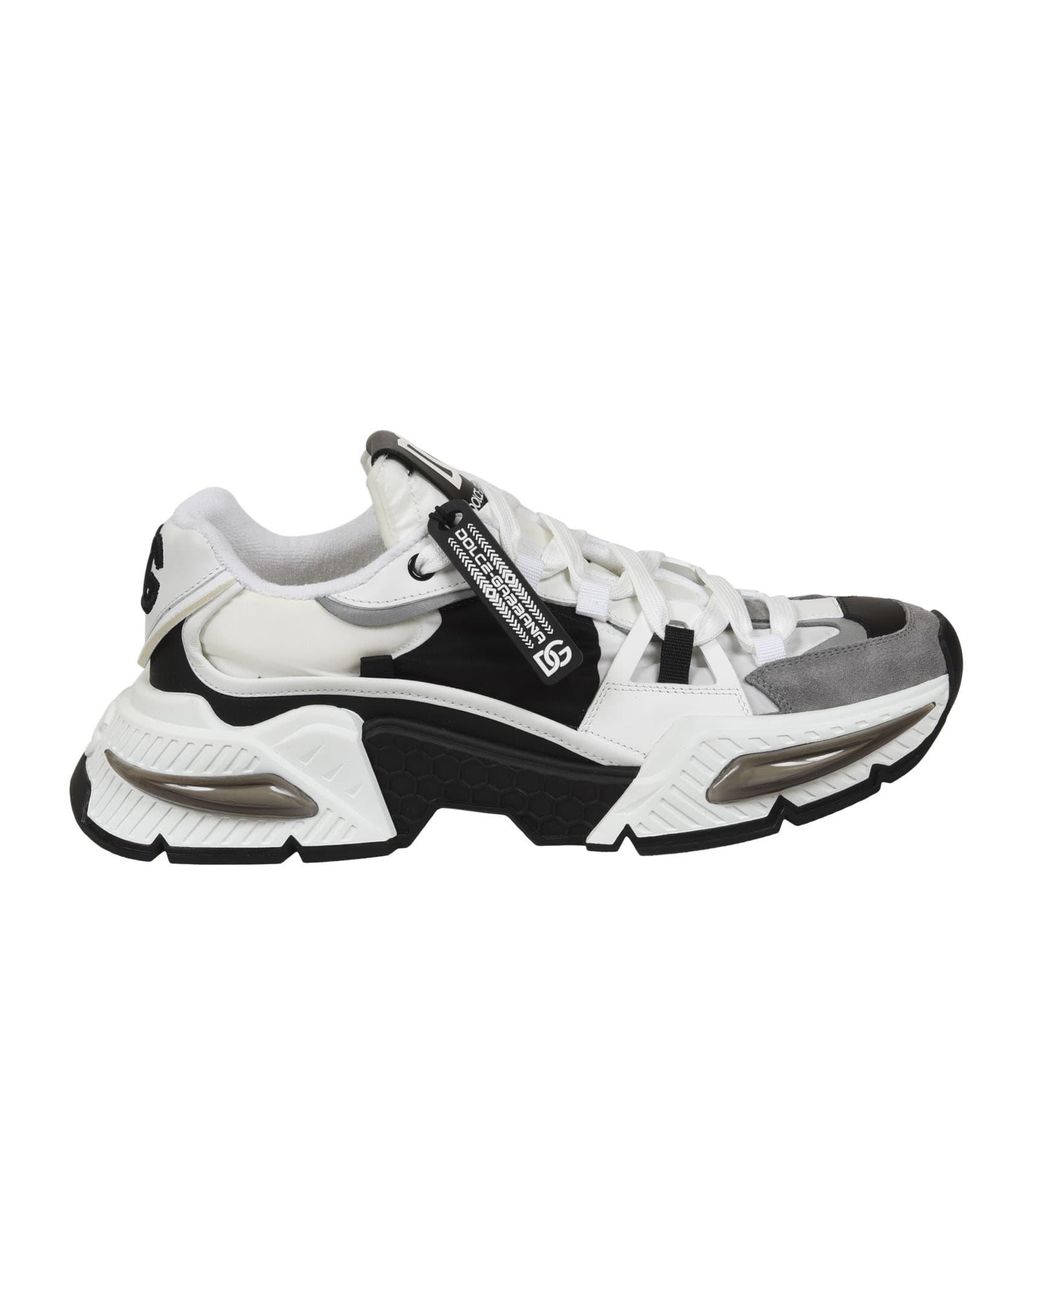 Dolce & Gabbana Synthetic Mixed Material Airmaster Sneakers in White ...